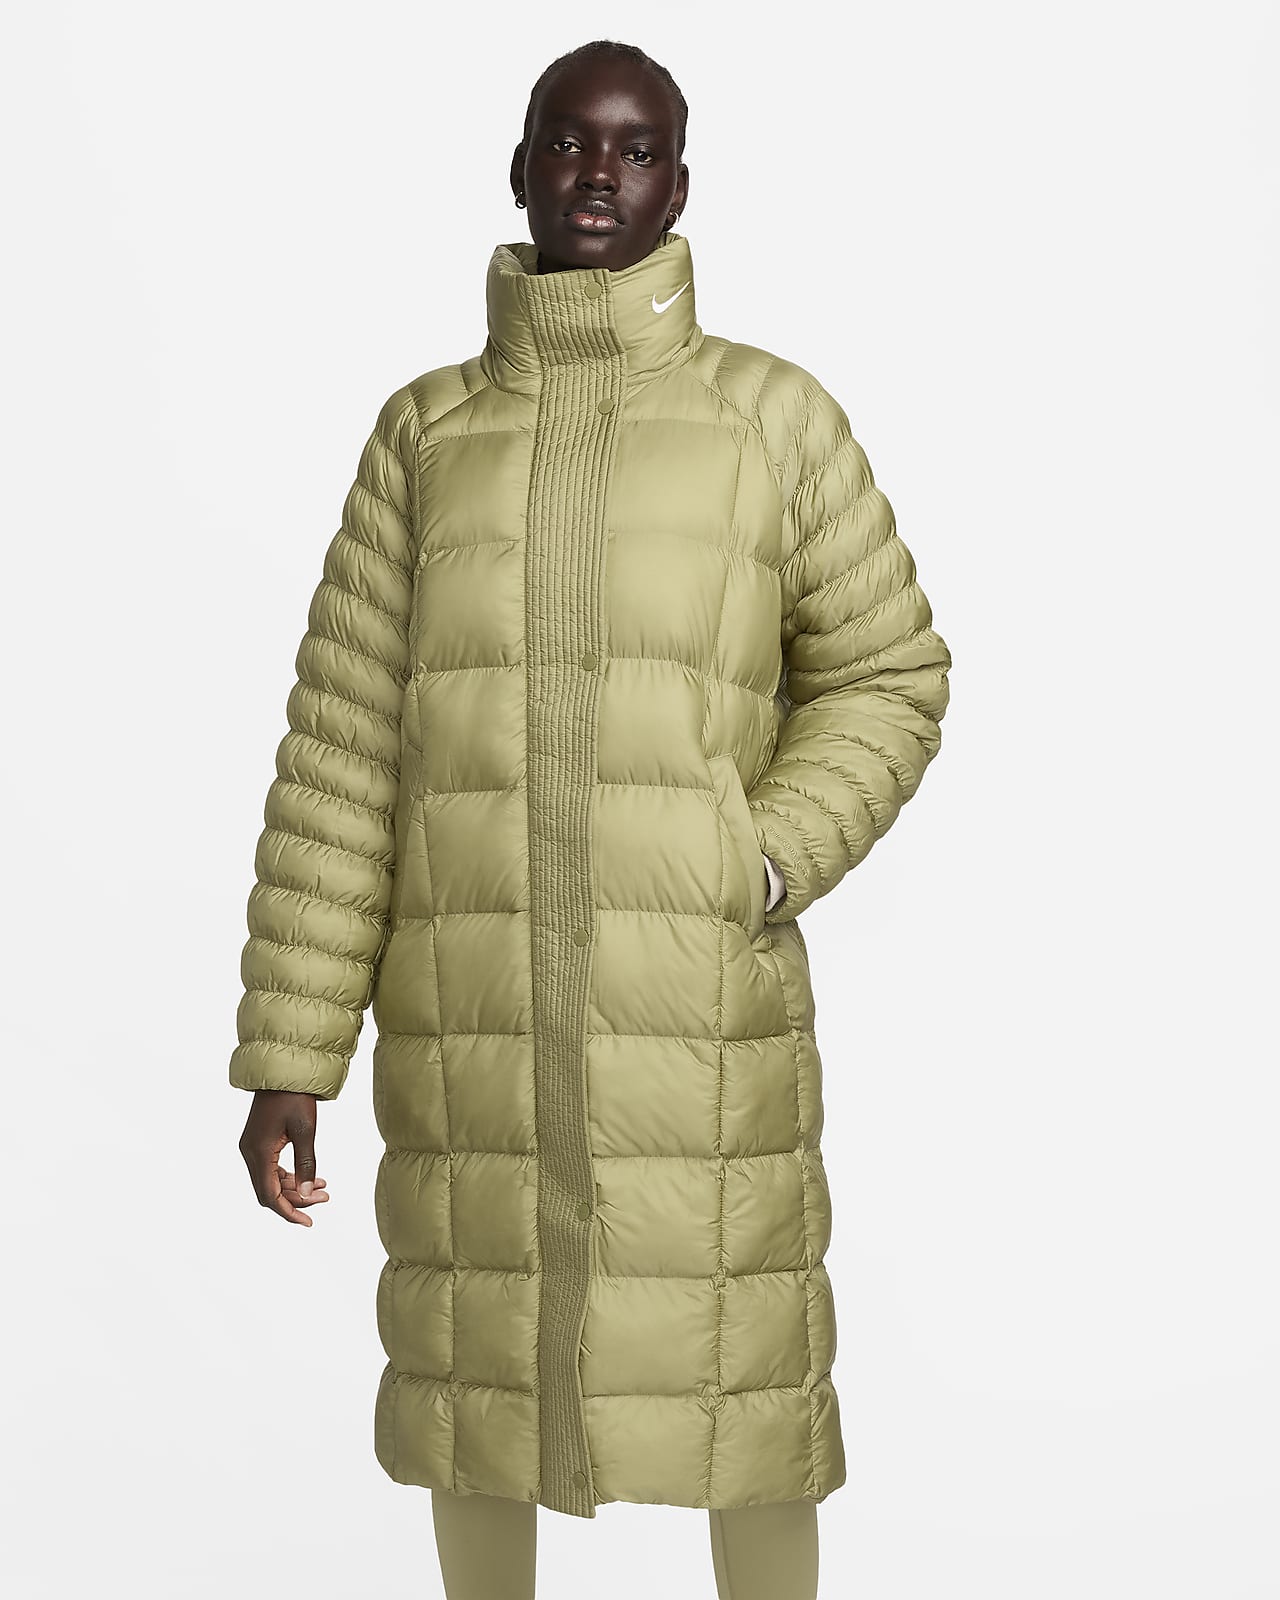 My favorite Canada Weather Gear Coats are as low as $24.99 +